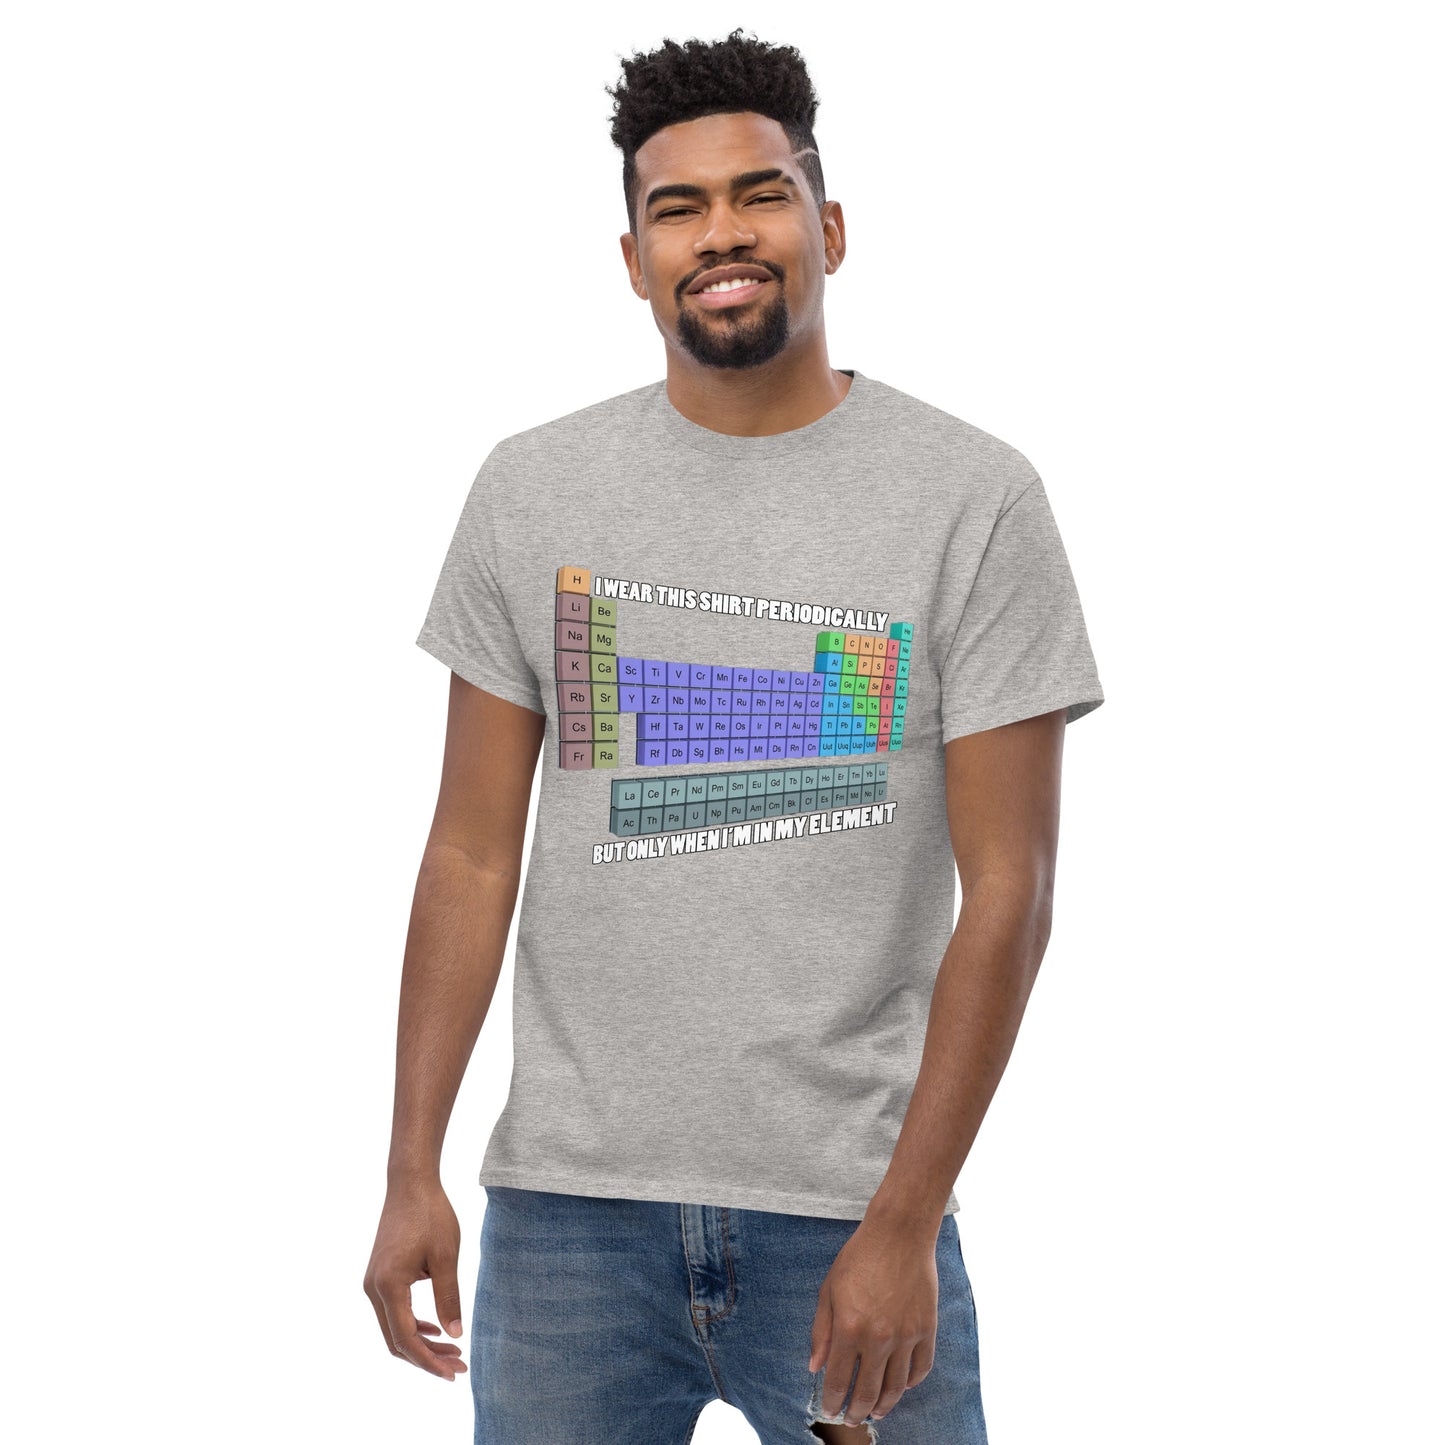 "I wear this T-shirt periodically" T-shirt